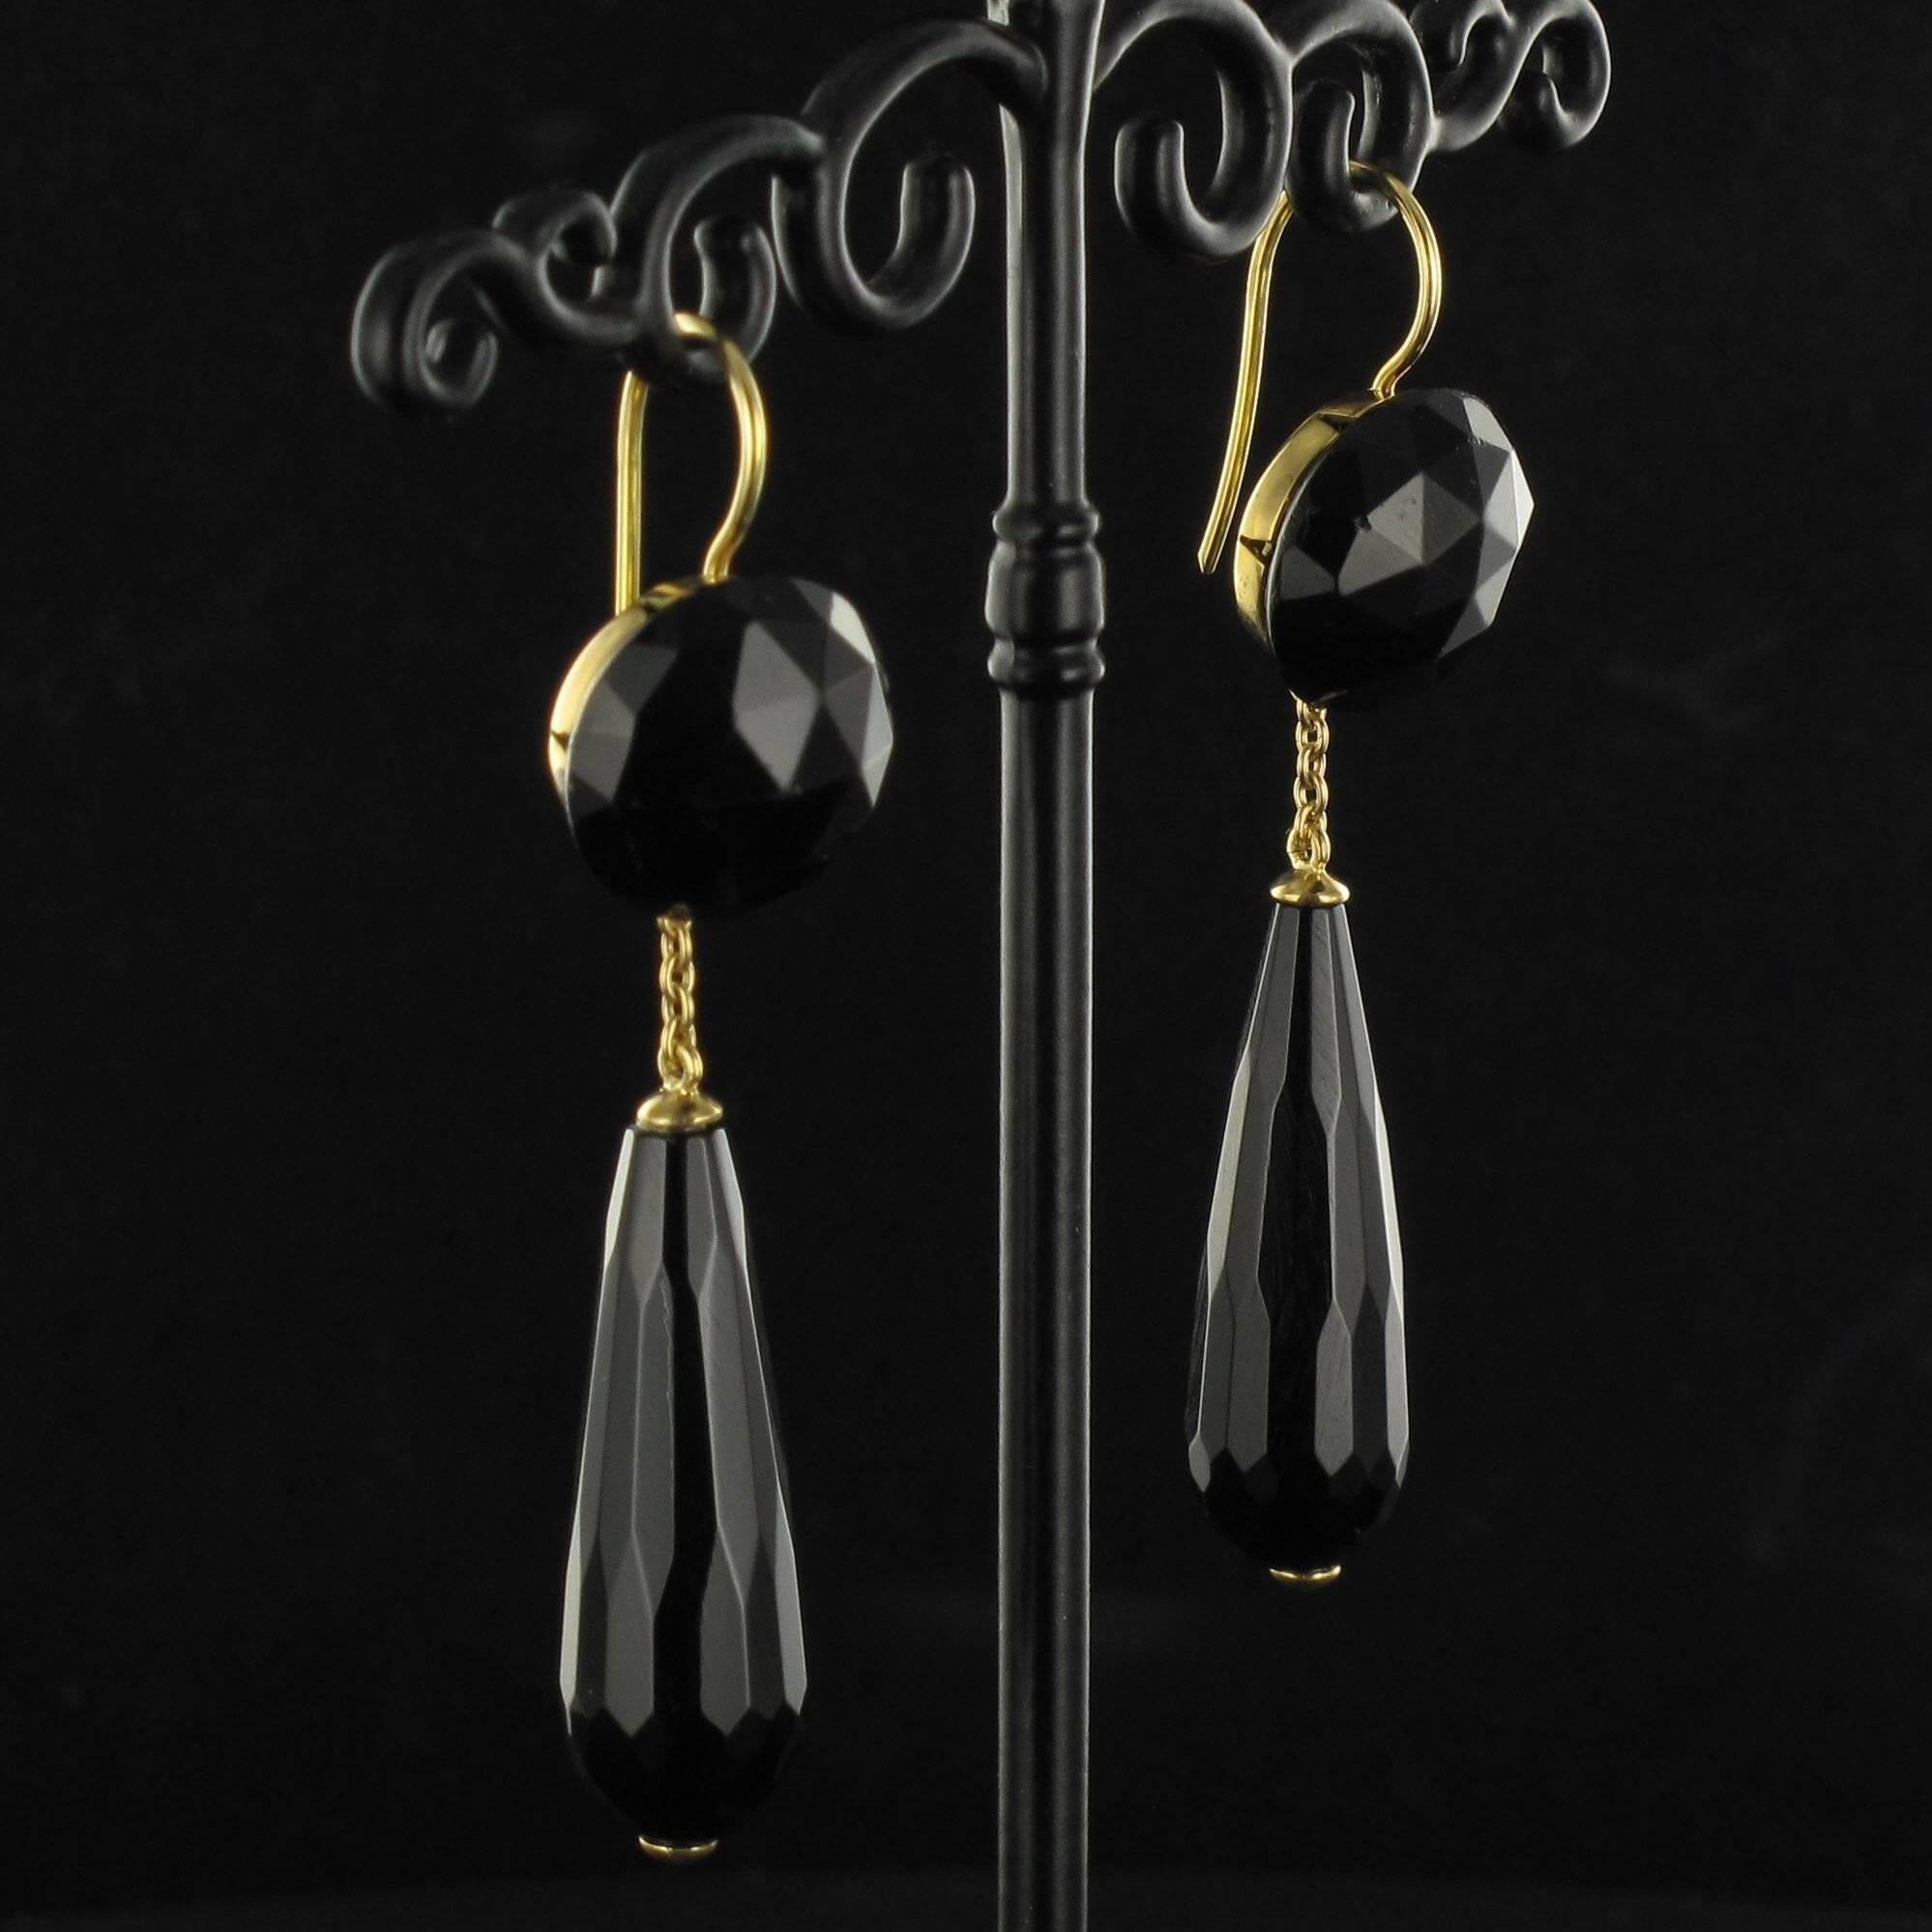 Baume creation - unique jewel.
 
Pair of 18 carat yellow gold earrings, eagle head hallmark.

Each earring features a flat circular facetted onyx bead on an openwork back from which is suspended a 7 gold link chain holding a pear cut onyx